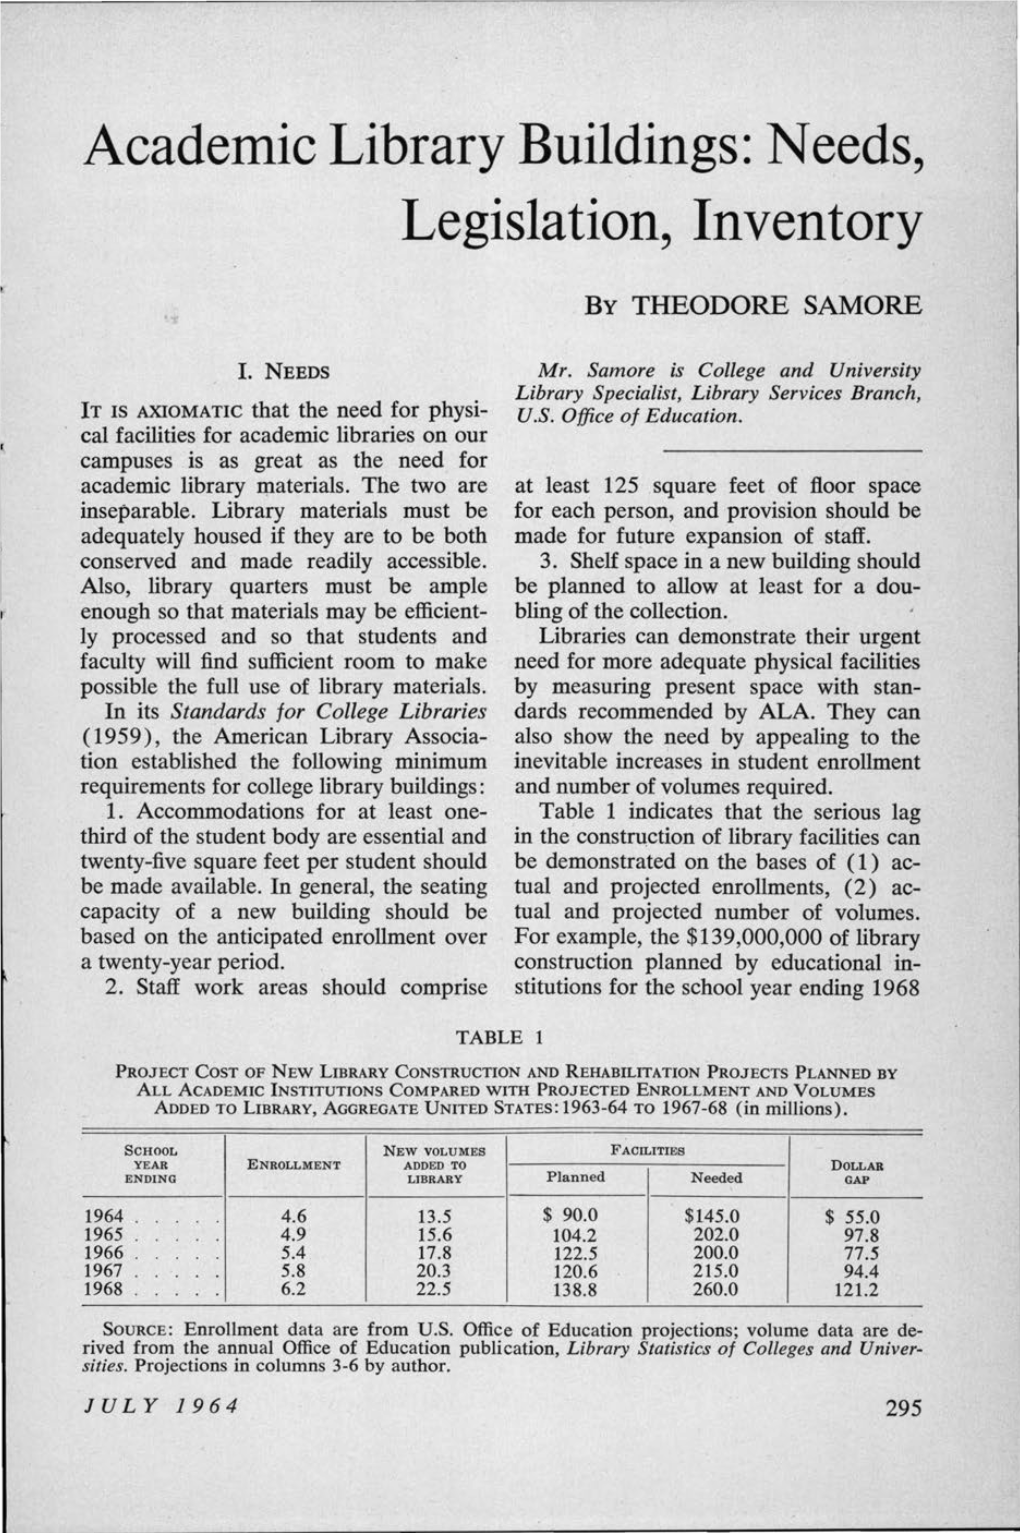 COLLEGE and RESEARCH LIBRARIES TABLE 3 AGE of ACADEMIC Lmrary BUILDINGS of SELECTED INSTITUTIONS in SIXTEEN STATES, MARCH 1963*